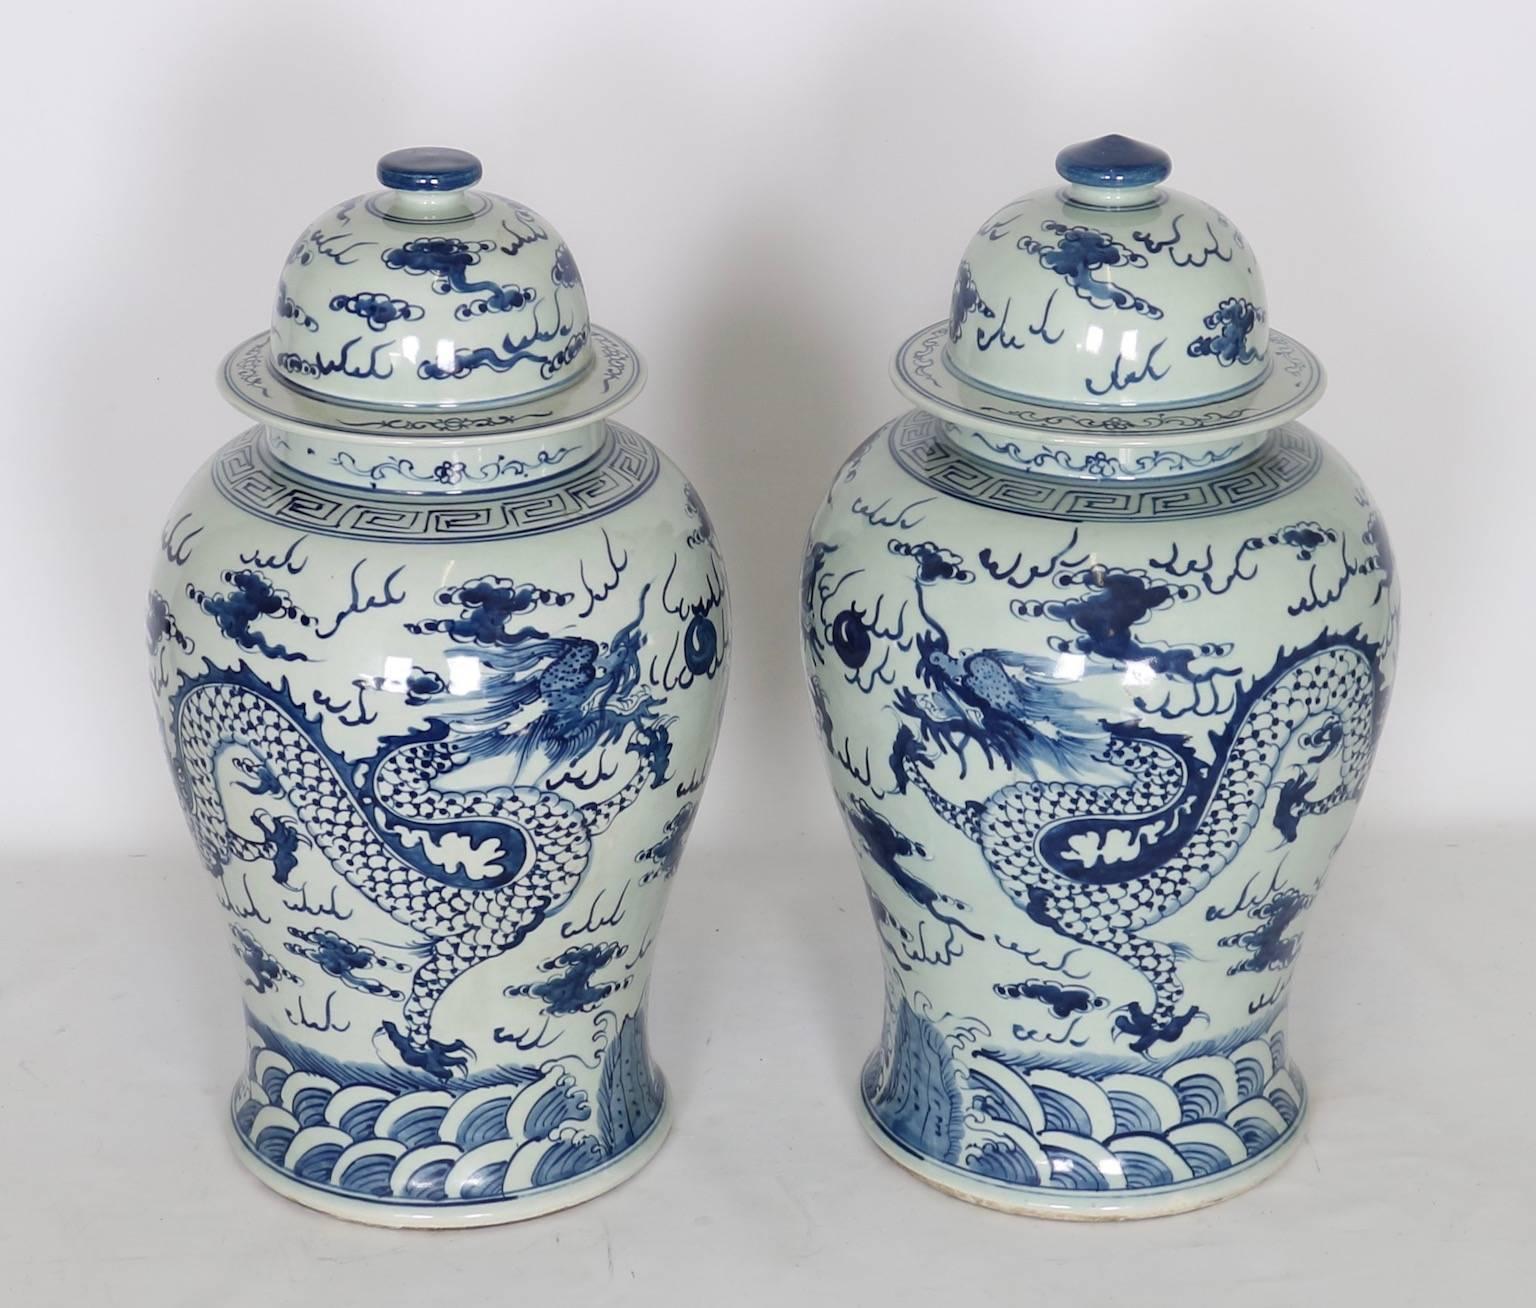 Chinese export ginger jars dating from the late 20th century. Features blue illustration against a white background of a pair of dragons above the sea. The pair include matching lids. Wear consistent with age and use. The pair are in excellent